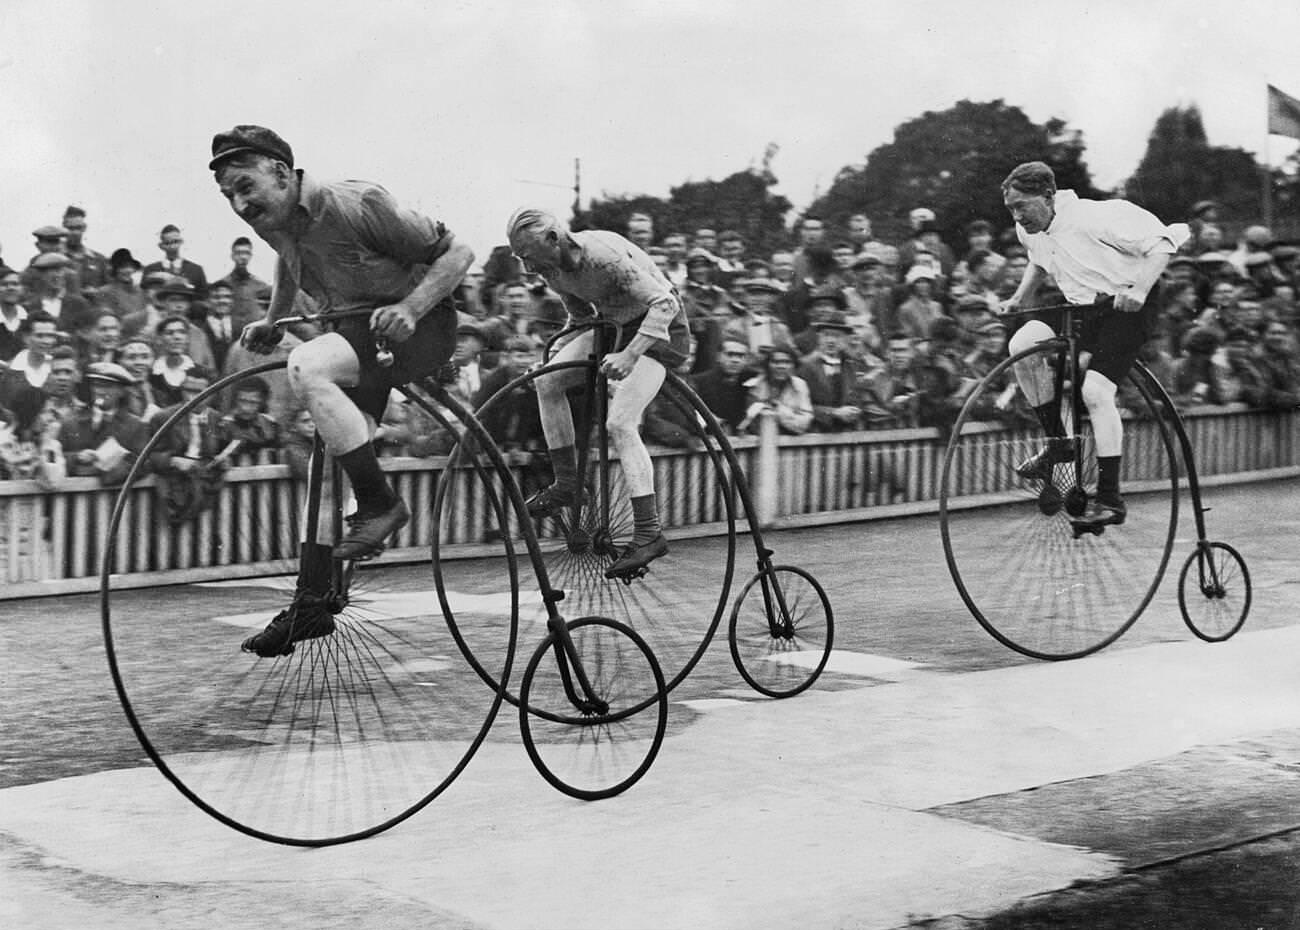 Man riding a penny-farthing bicycle with a woman running beside him, Sweden, 1944.